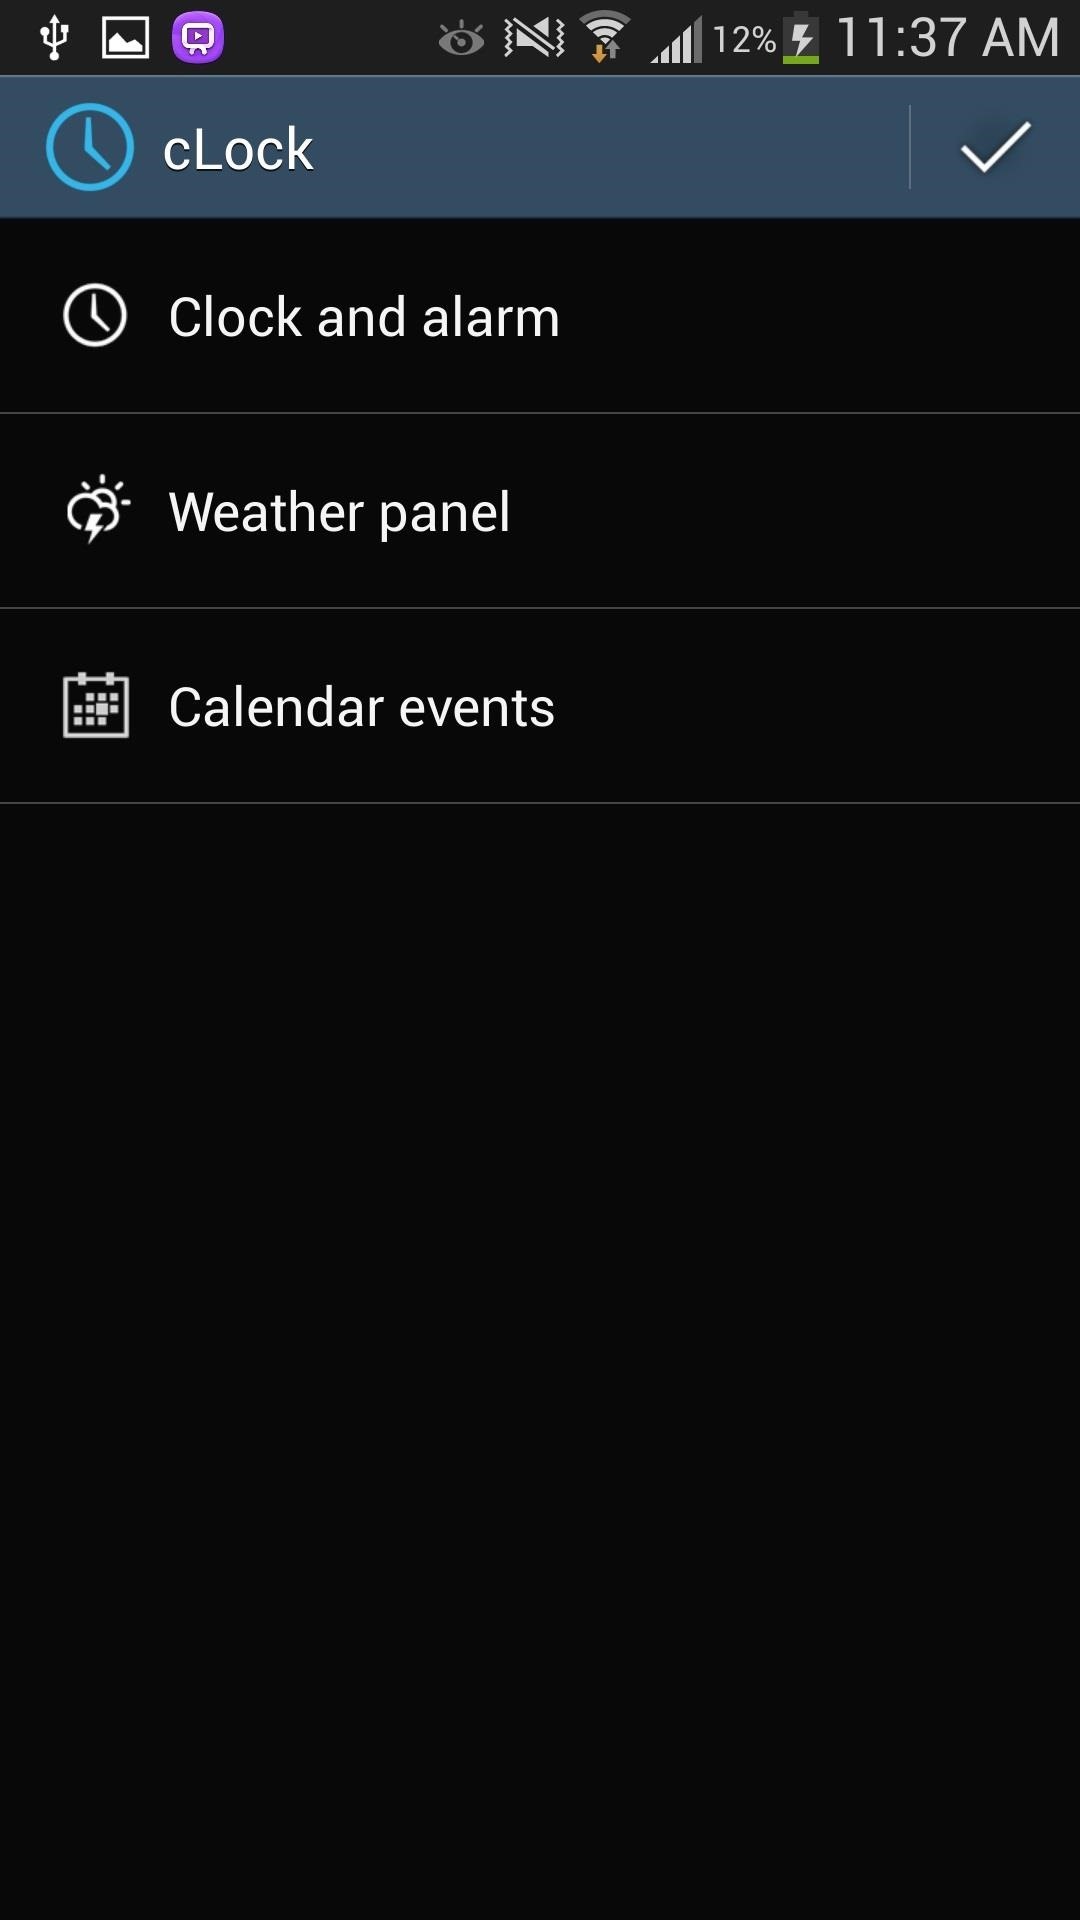 How to Get CyanogenMod's cLock Home & Lock Screen Widget on a Non-Rooted Samsung Galaxy S4